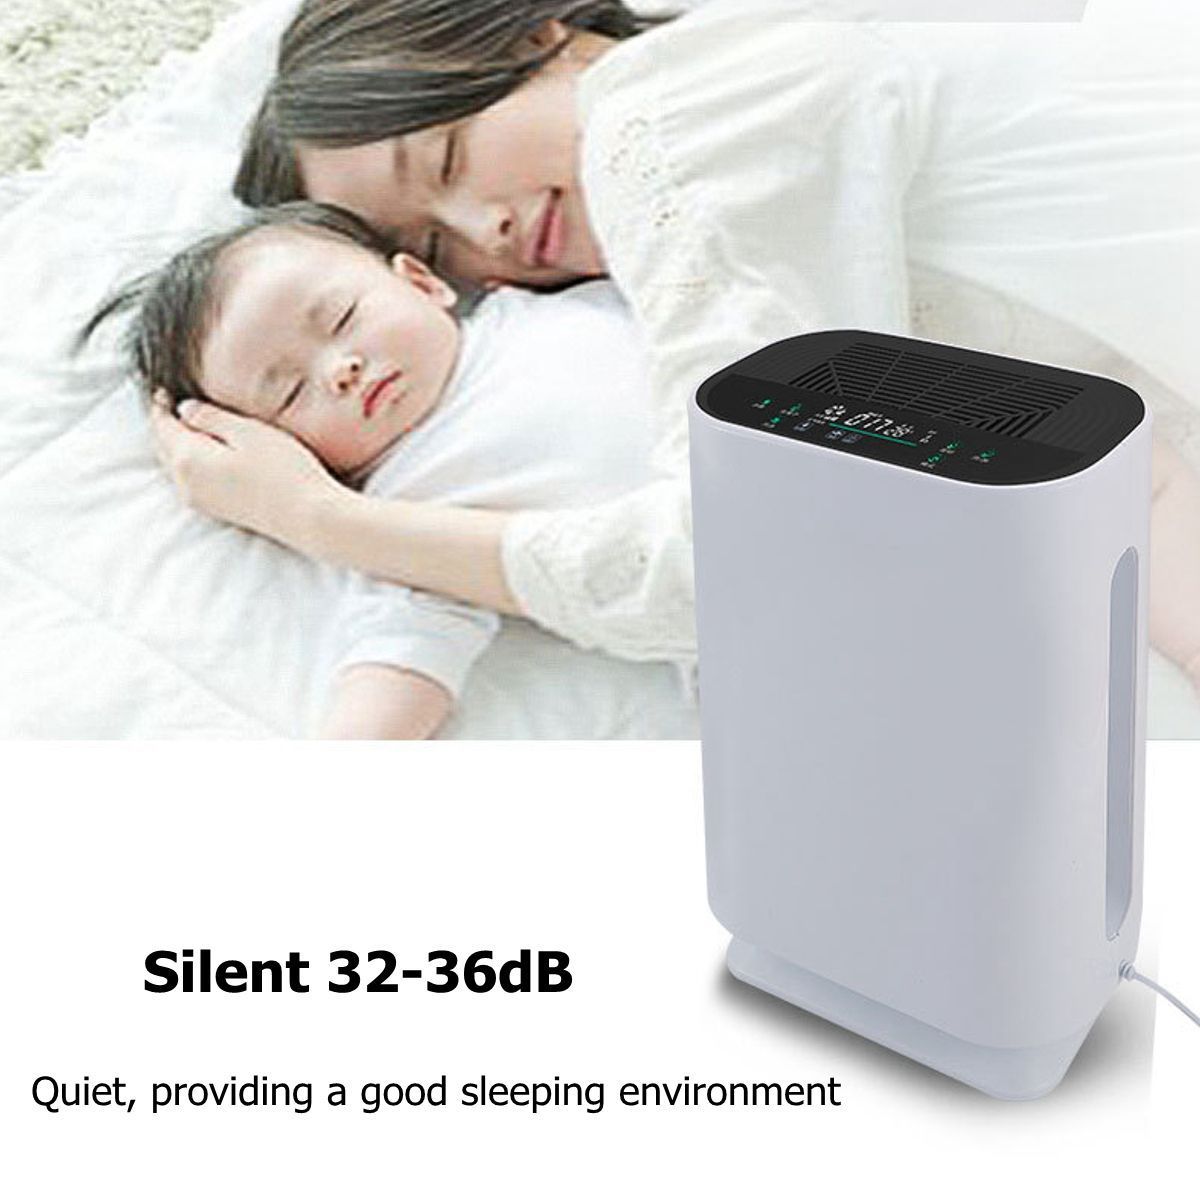 Air-Purifier-Ioniser-Quiet-Mode-Hepa-With-Dual-Filtration-Filter-Ionizer-HEPA-1579314